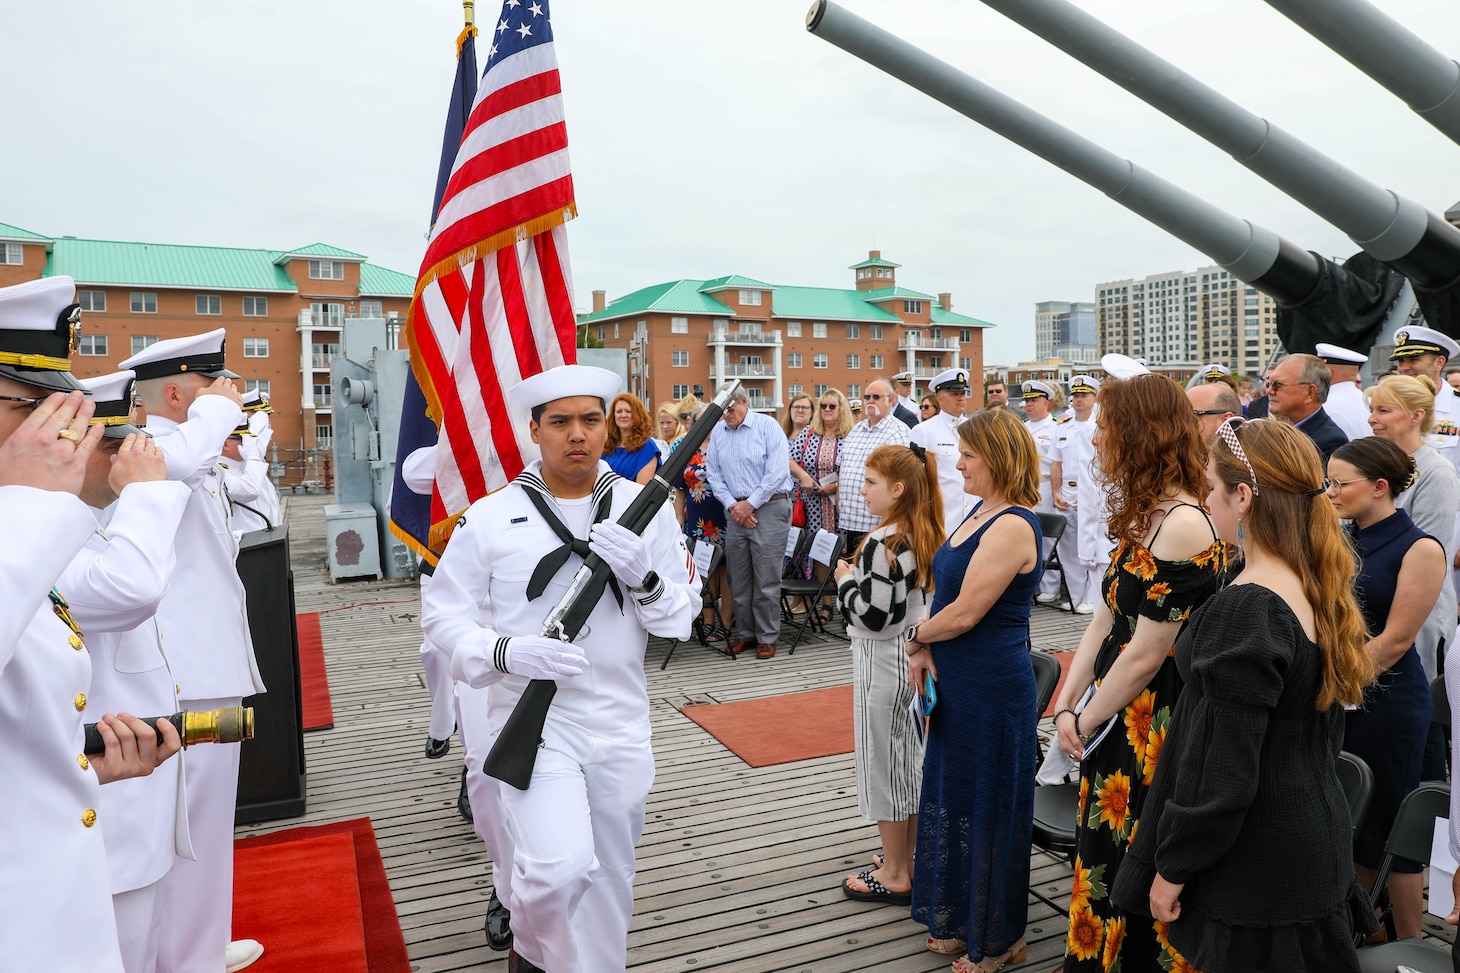 The color guard prepares to present colors during a change of command ceremony for the Virginia-class attack submarine USS John Warner (SSN 785) aboard the decommissioned Iowa-class battleship USS Wisconsin.